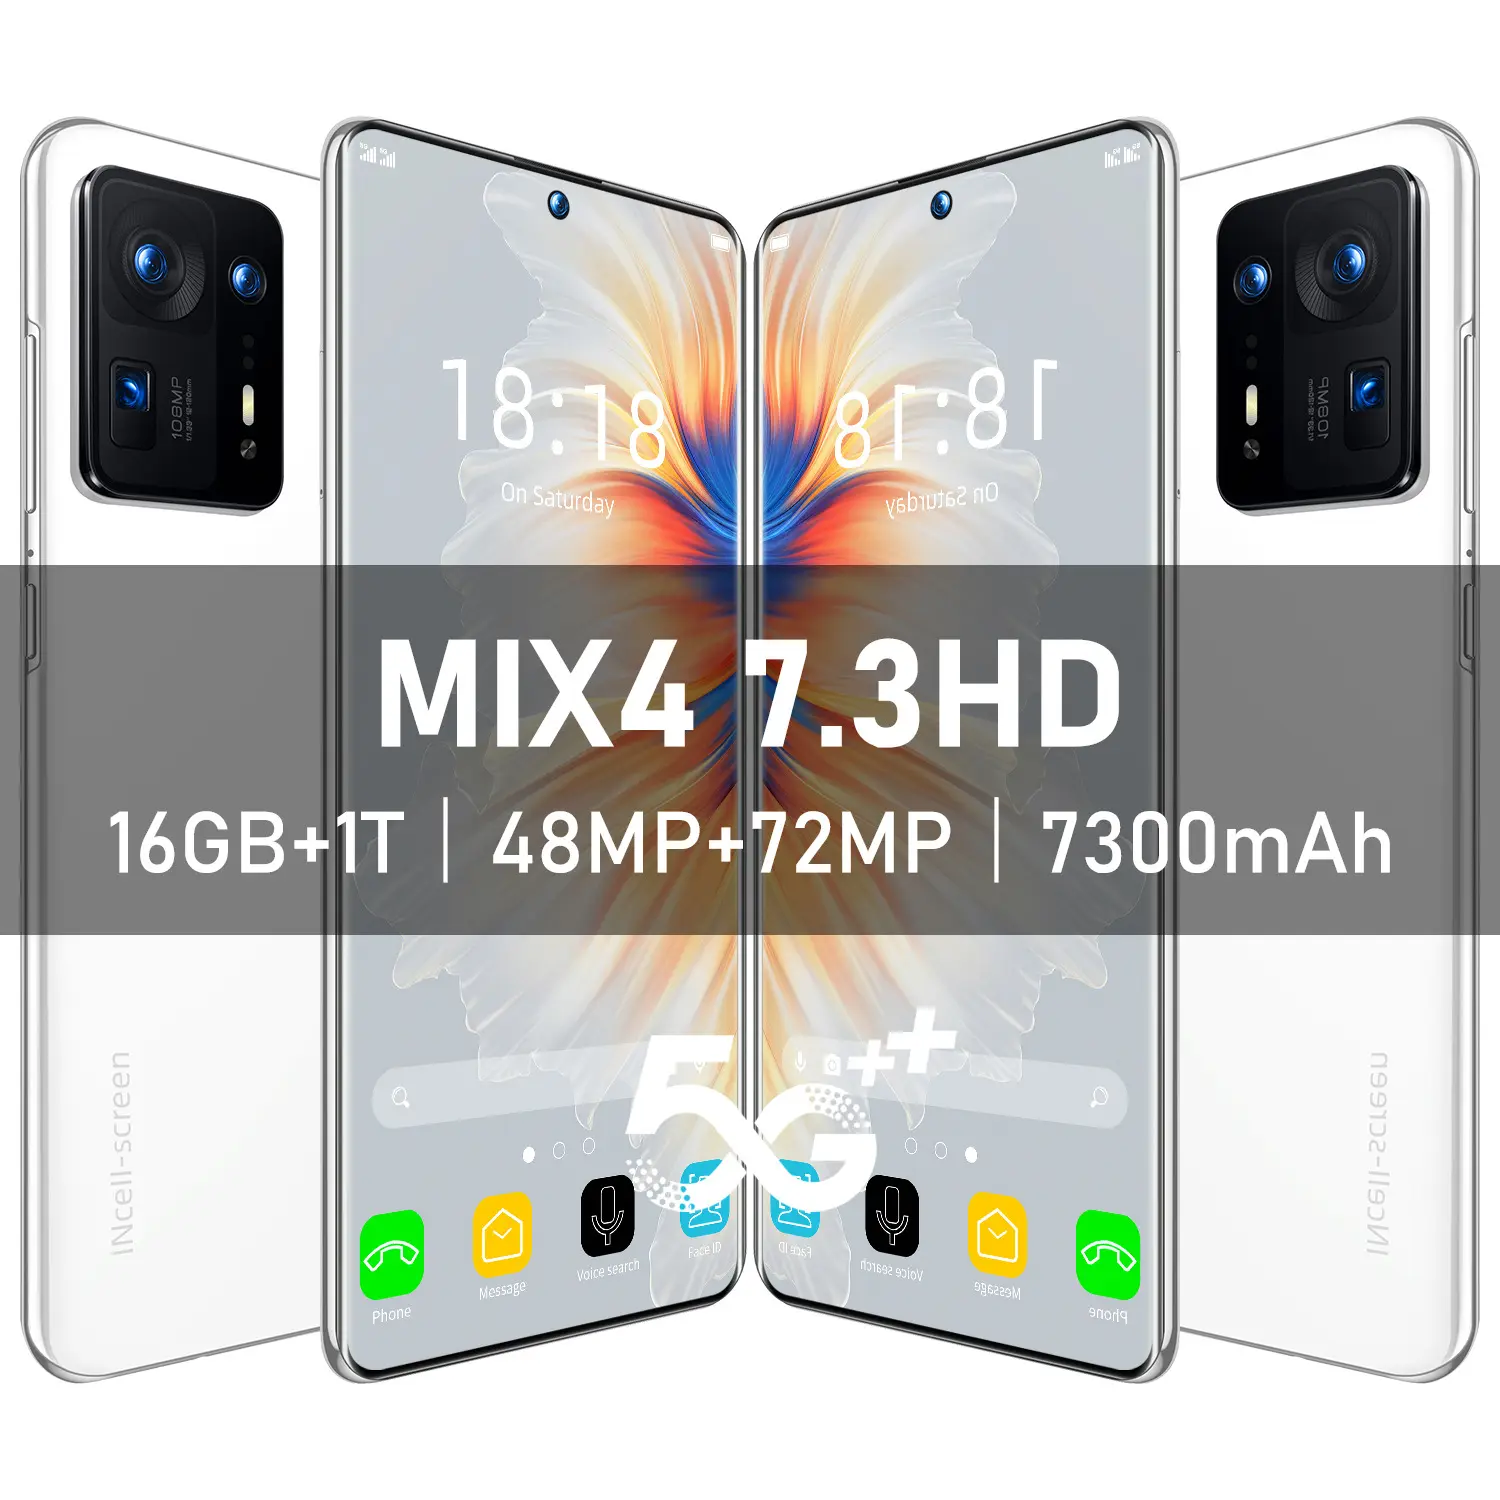 Low-priced MIX4 cross-border mobile phone 7.3 "true perforation high-definition large screen Android 8.1 sold 8 million pixels